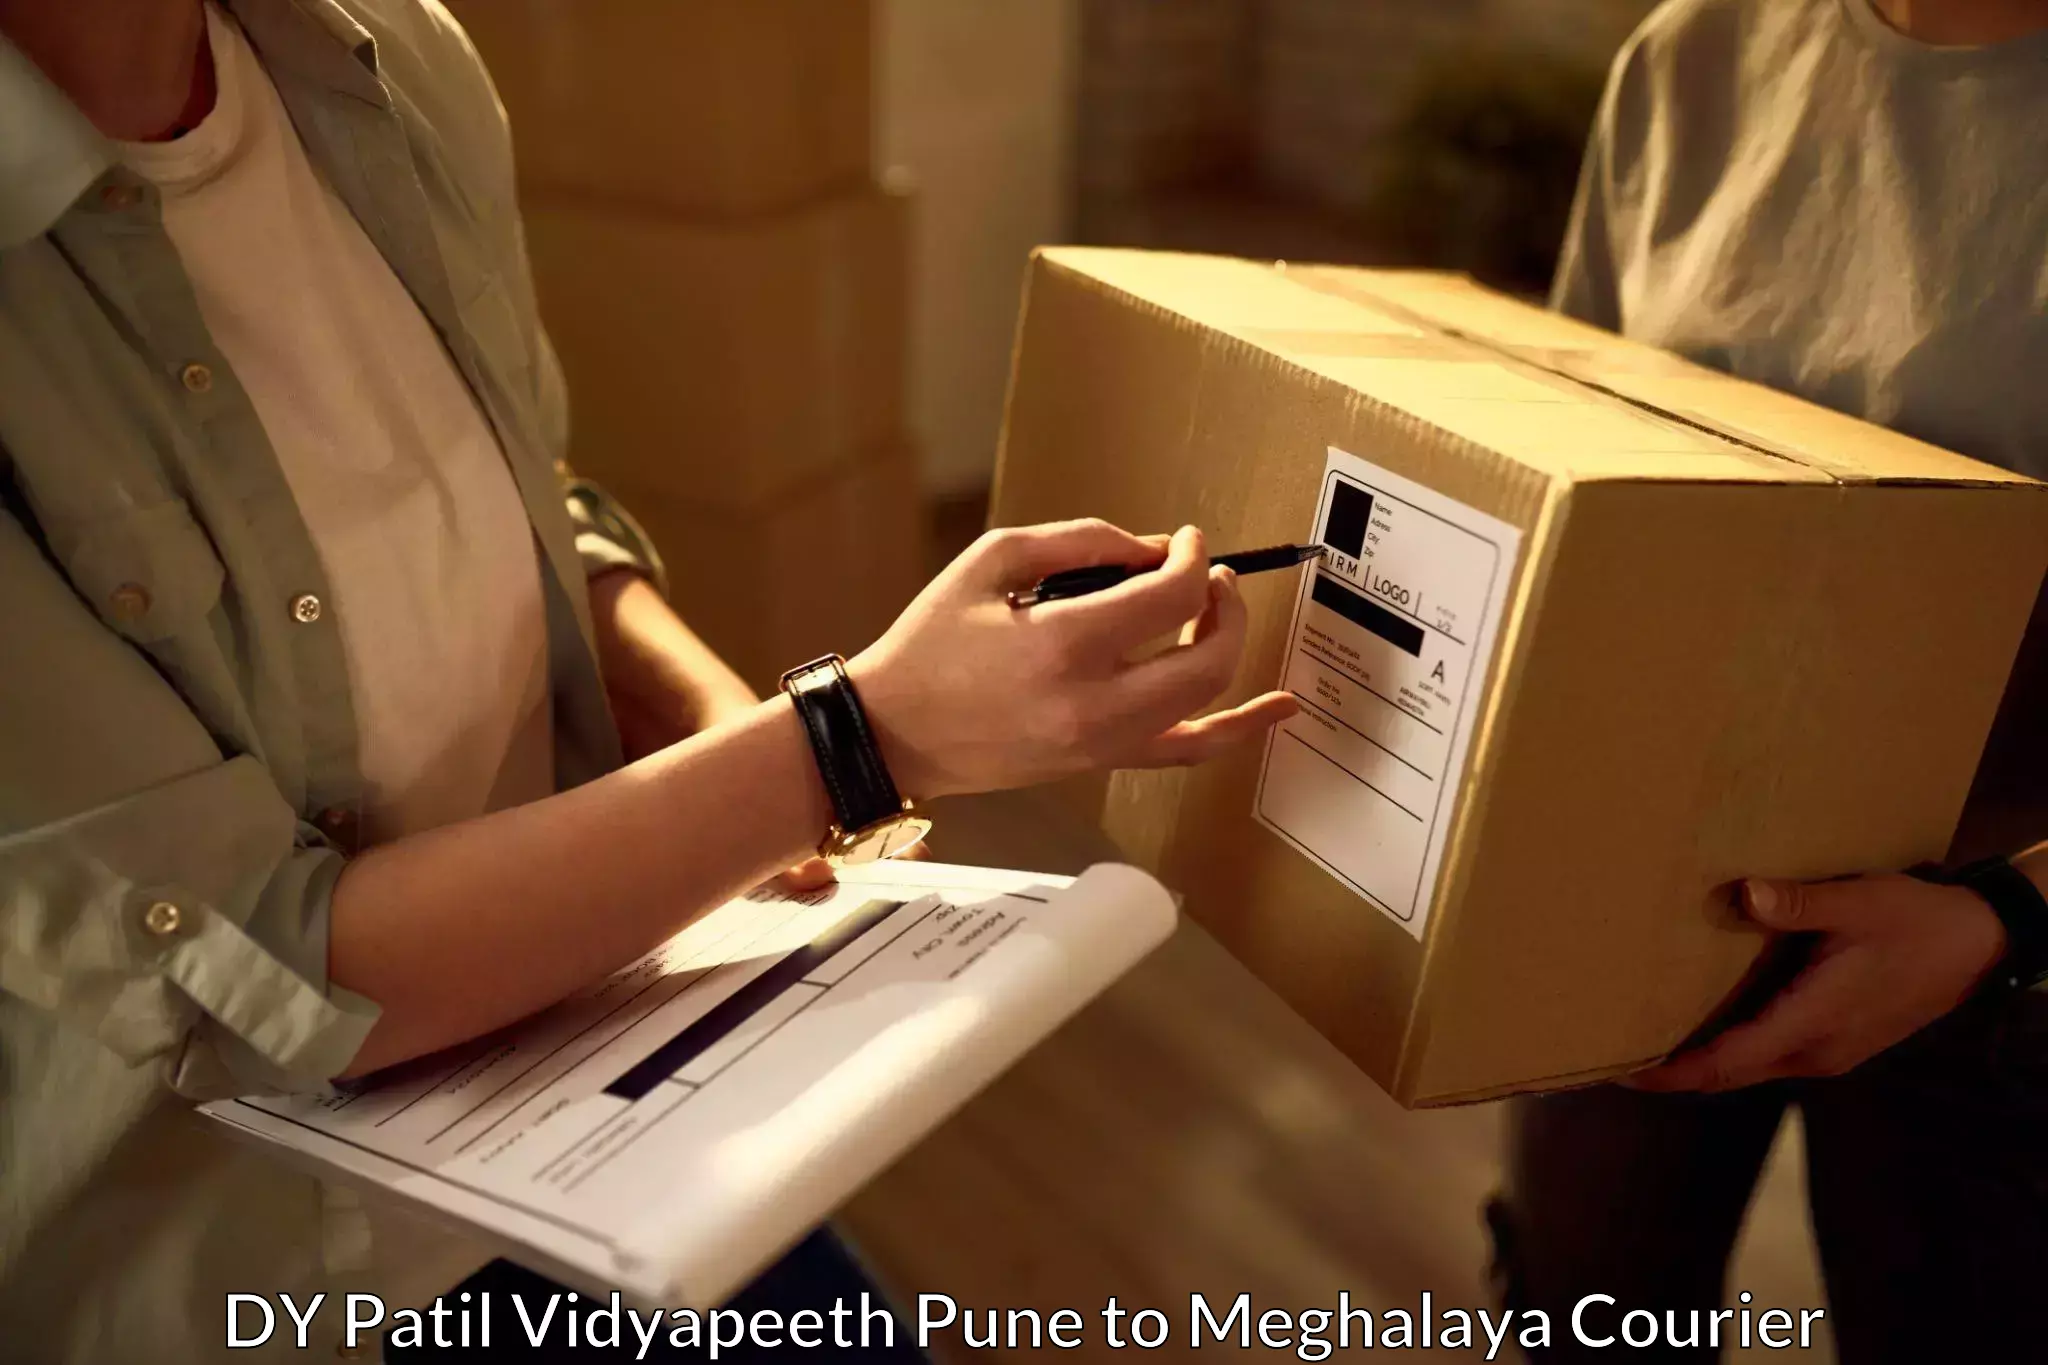 Express courier capabilities DY Patil Vidyapeeth Pune to Meghalaya